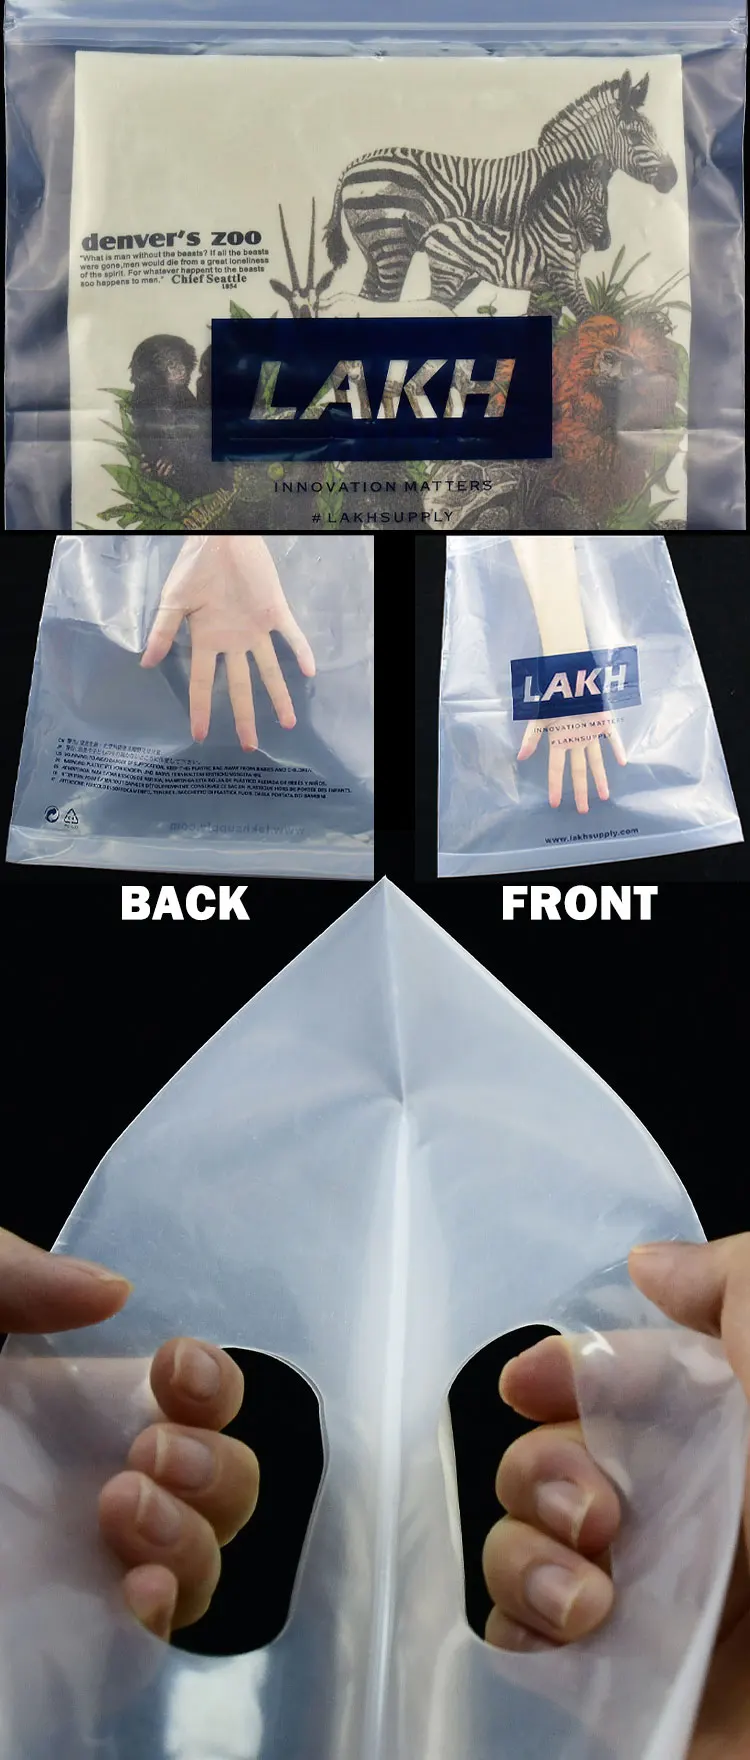 Custom biodegradable handle transparent bags for zip bag plastic bags for clothing store with logo warning manufacture